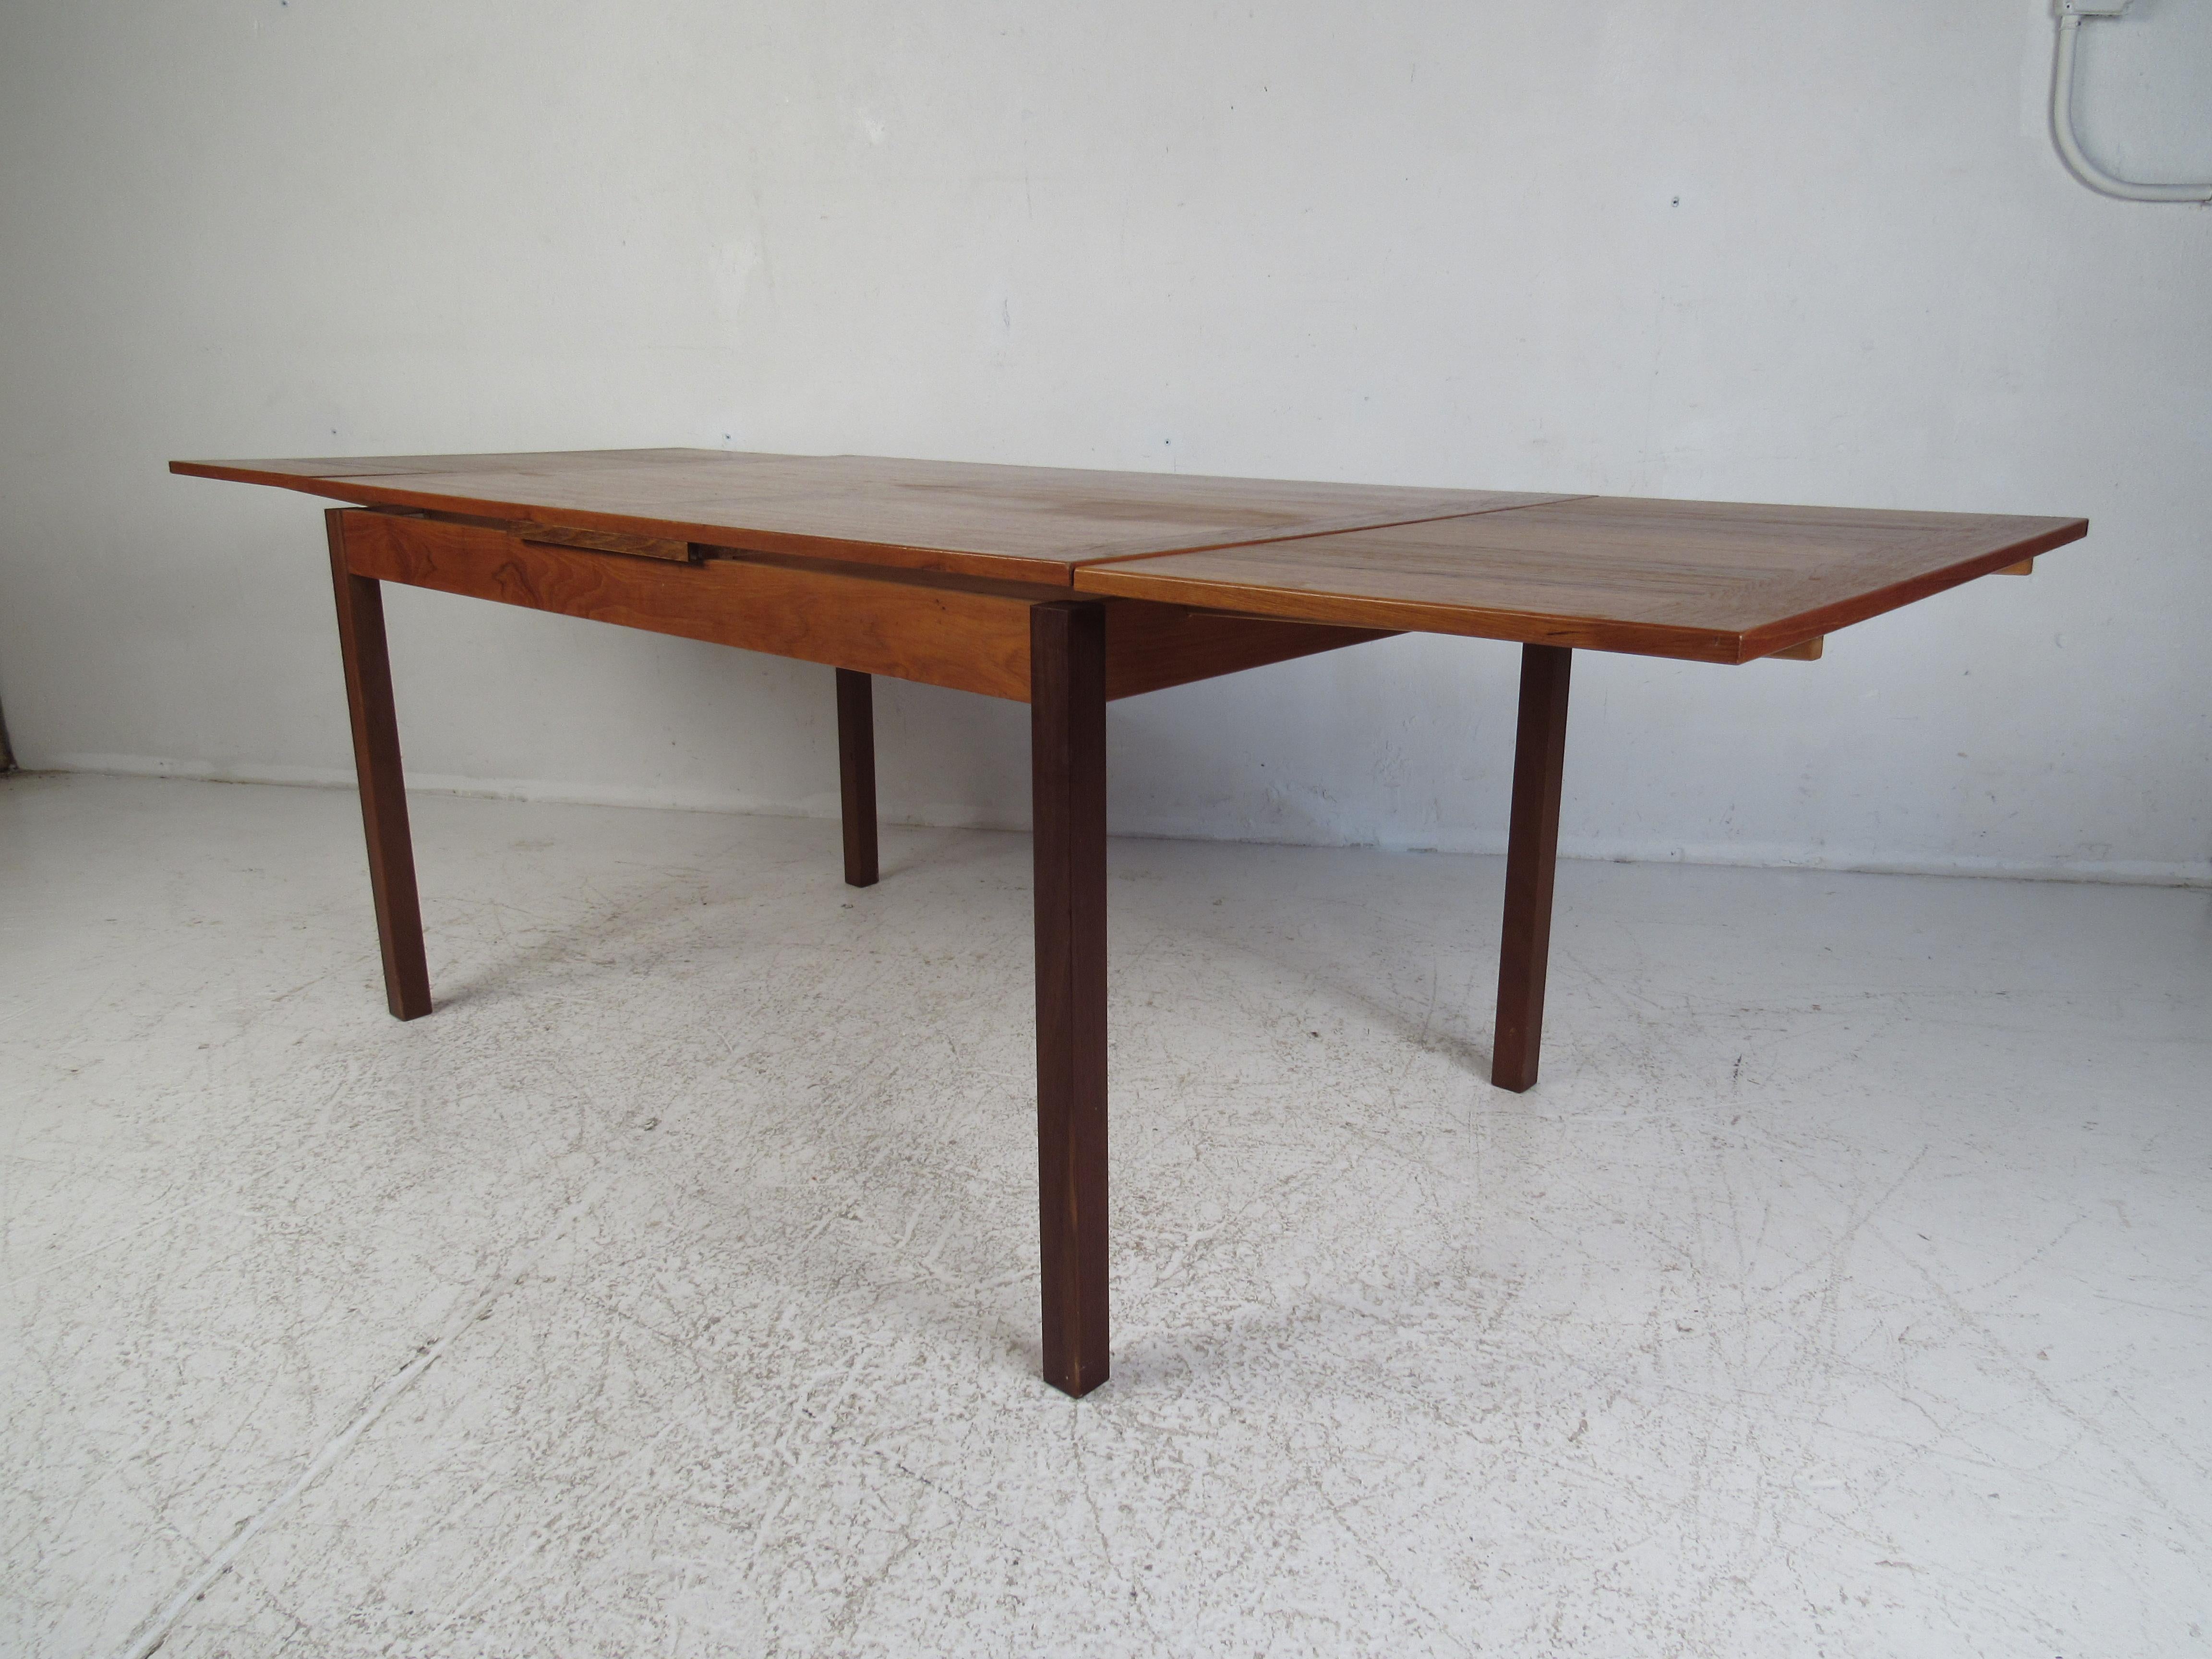 This stunning Mid-Century Modern dining table boasts a unique butcher block style wood grain on each of the leaves that complements the center. A convenient draw leaf design that expands from 53.25 inches wide all the way to 92.75 inches wide once